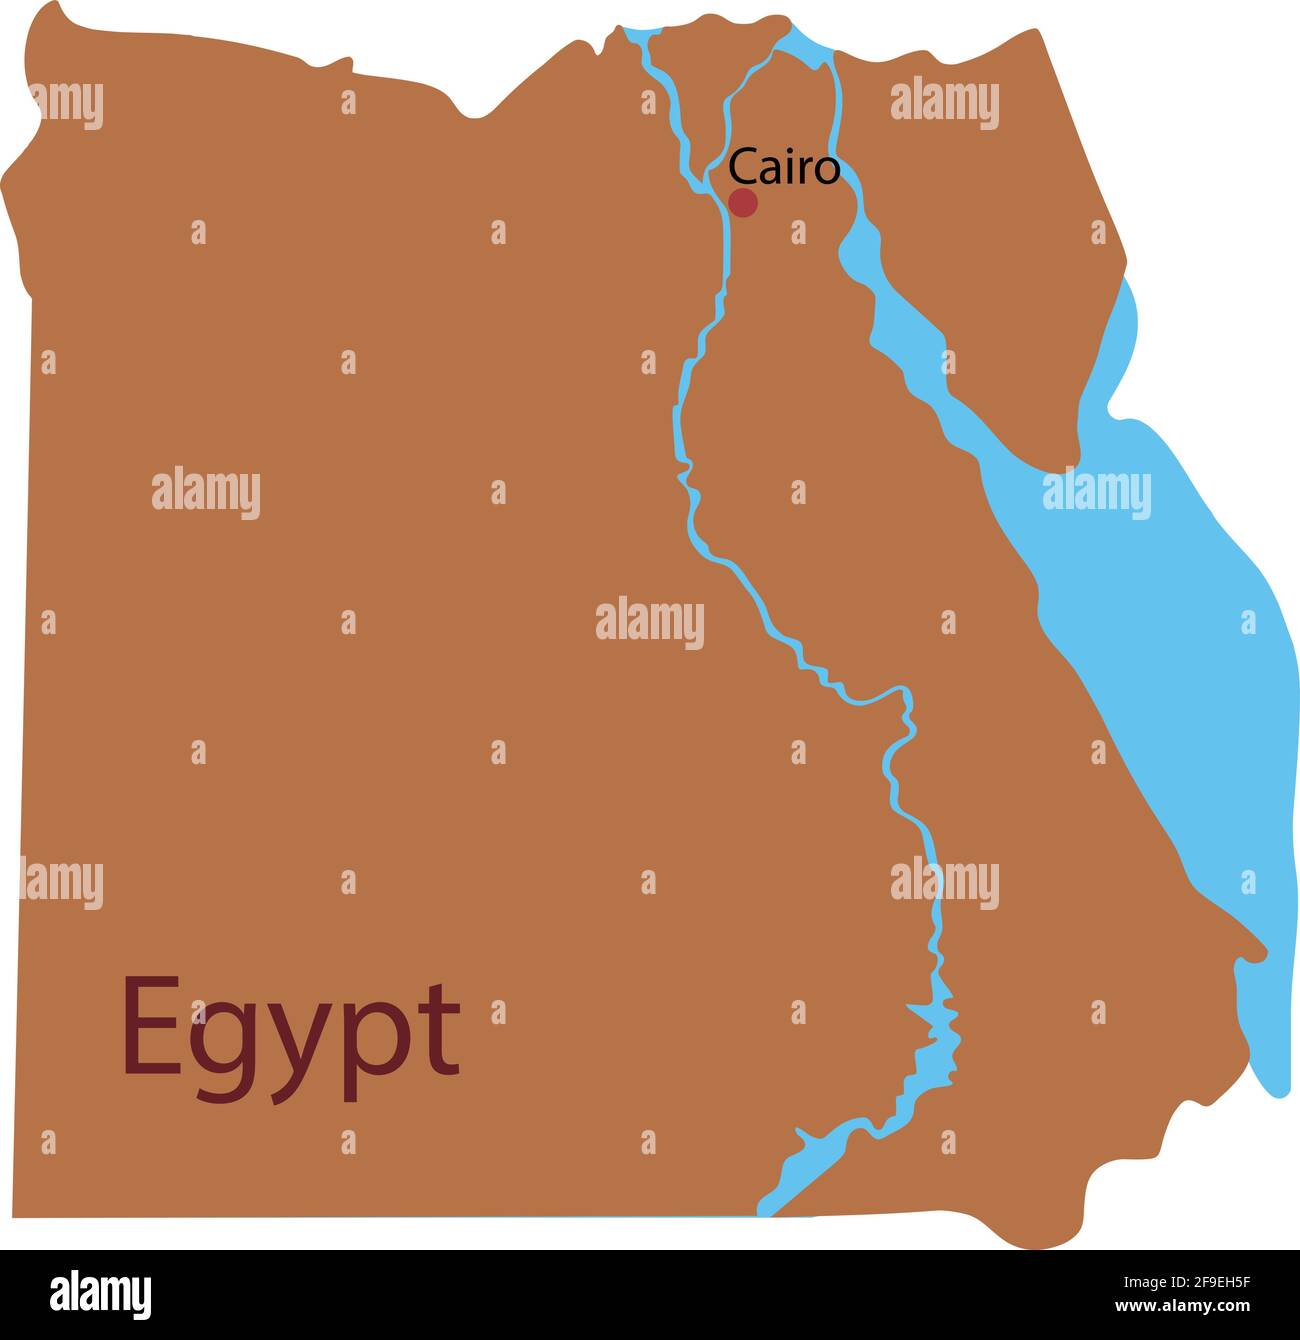 Vector illustration of a map of Egypt. Stock Vector